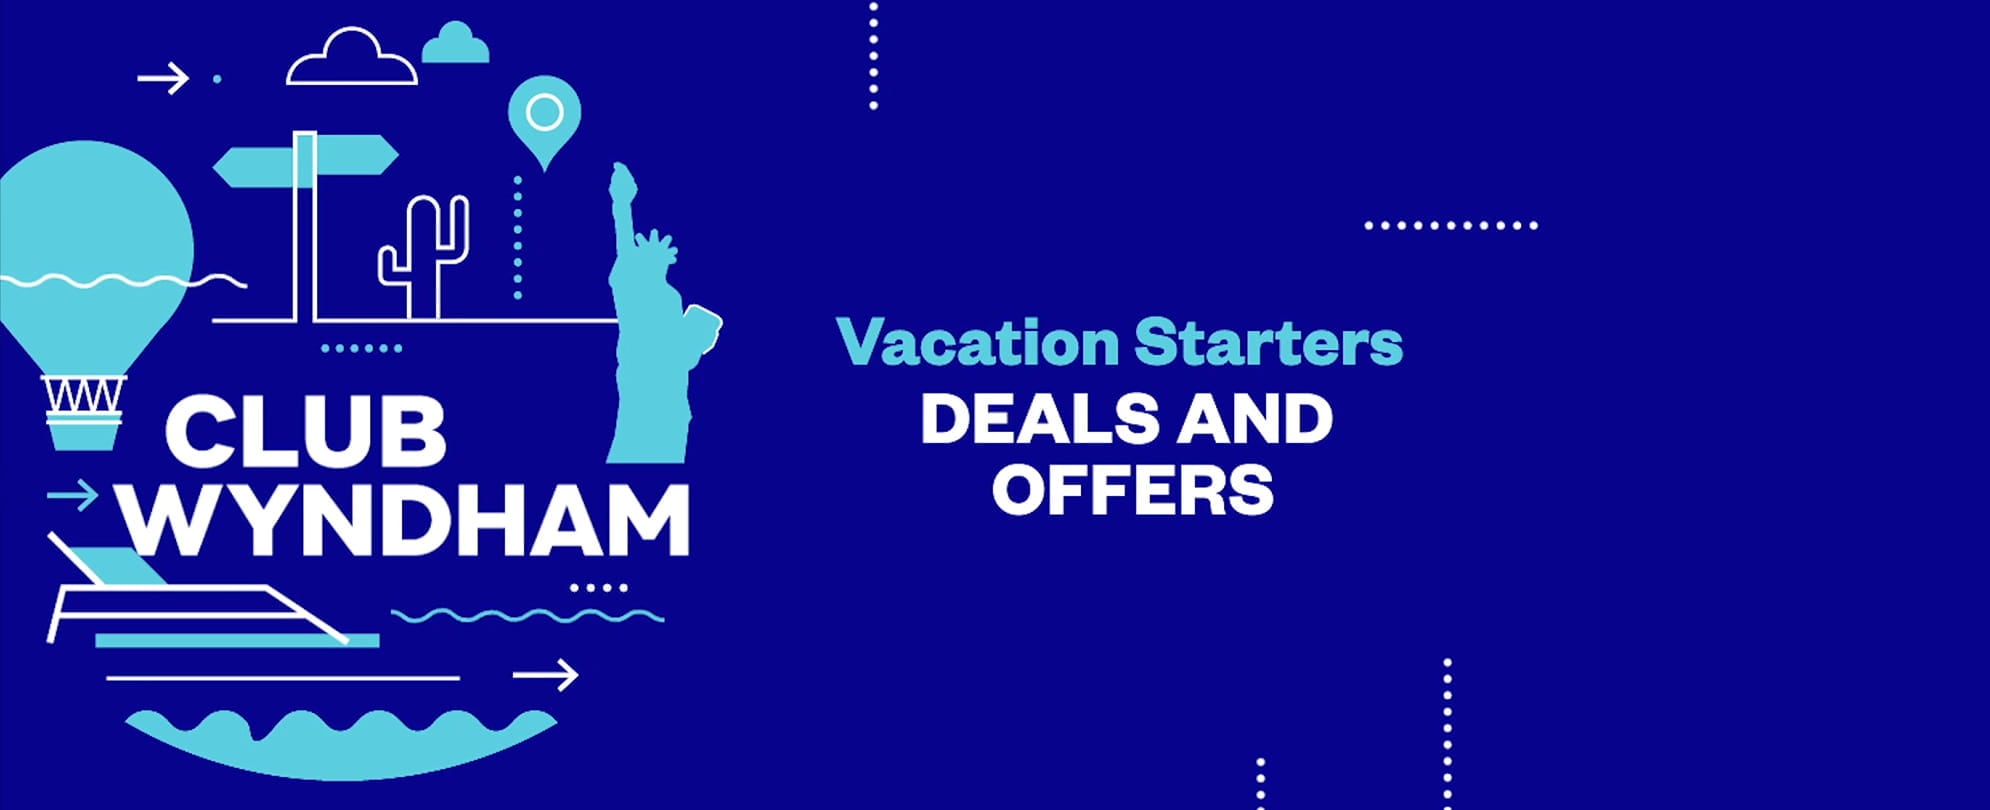 Deals and Offers overview from the Club Wyndham Vacation Starters video series